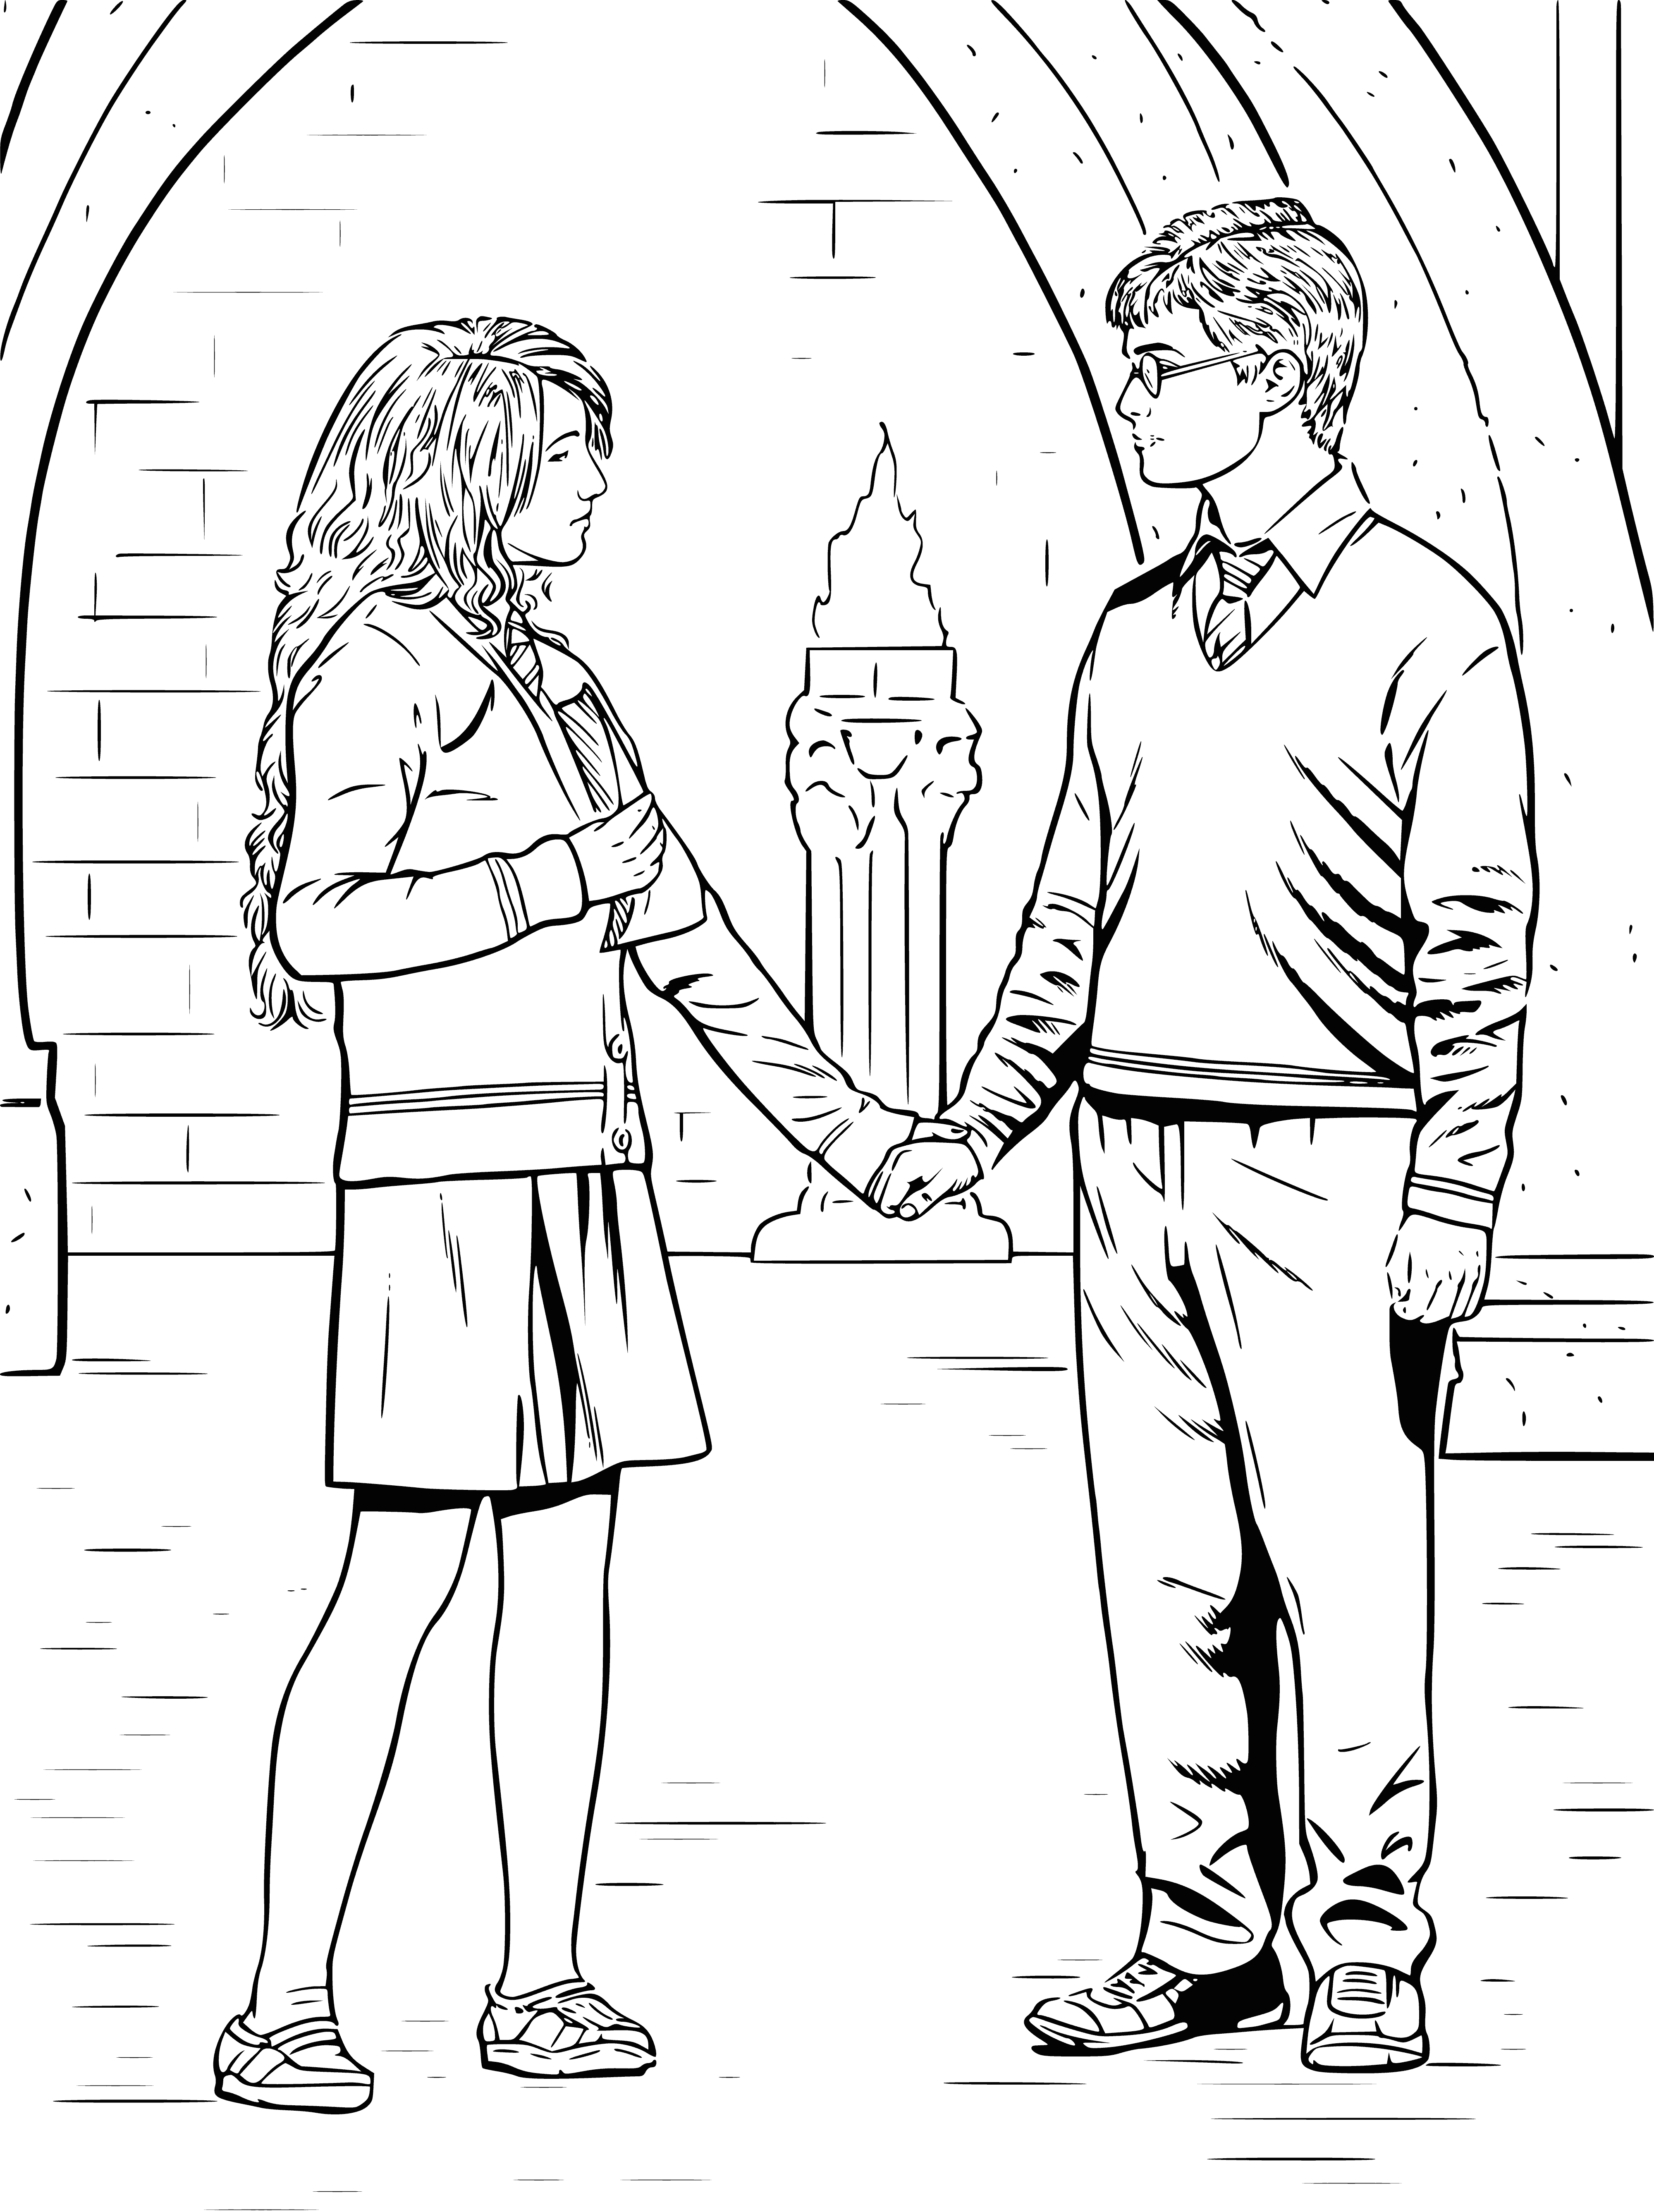 coloring page: Harry and Luna standing together, him holding a wand, her wearing a star necklace; a coloring page of friendship and possibility.